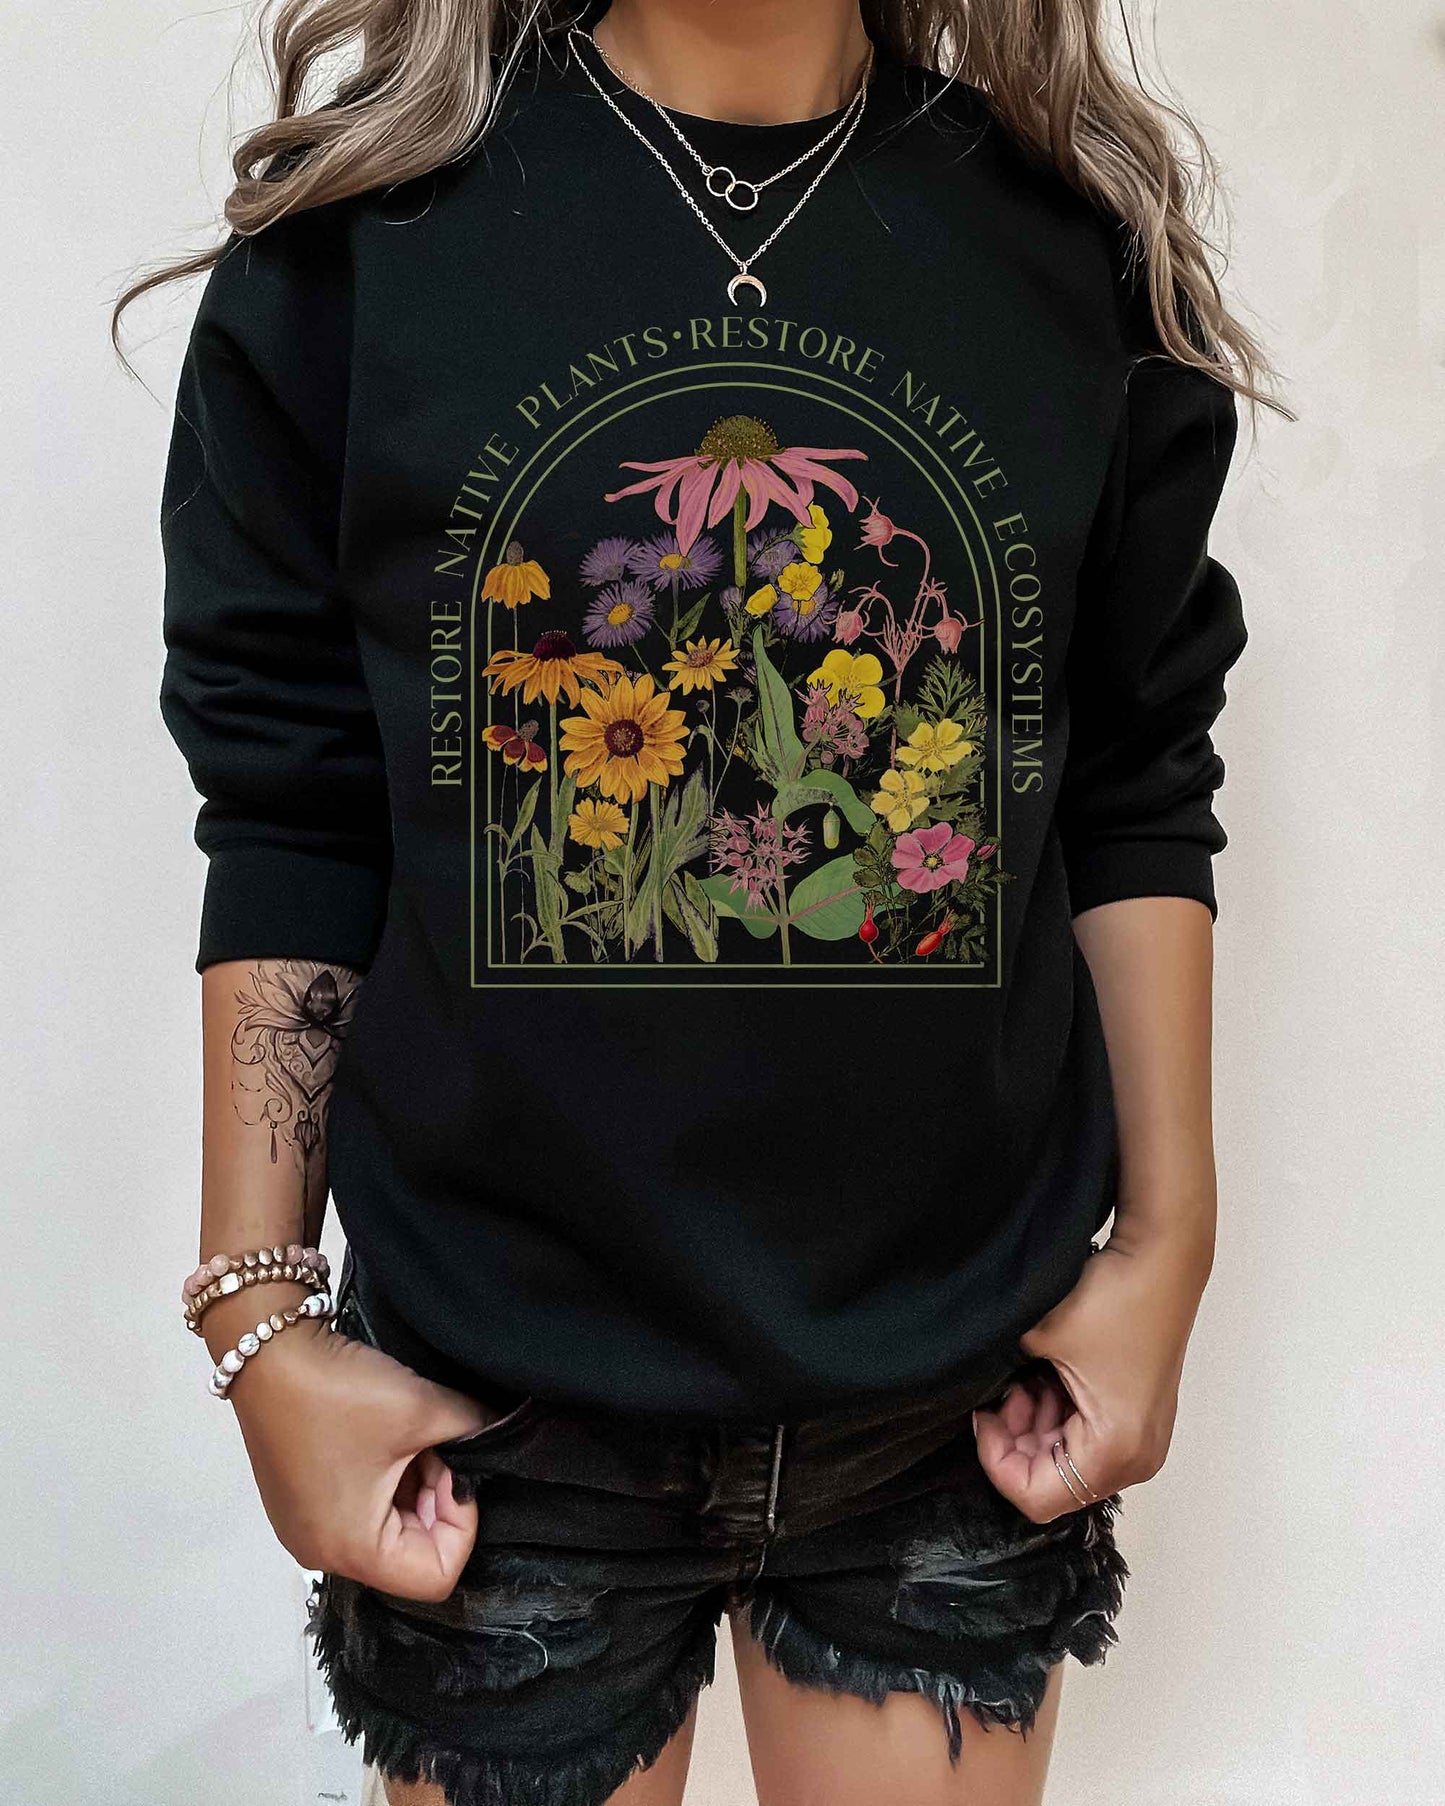 Save Native Plants Unisex Sweatshirt for Conservation, Ecology, Environment. For Nature Lovers, Naturalists, Gardeners